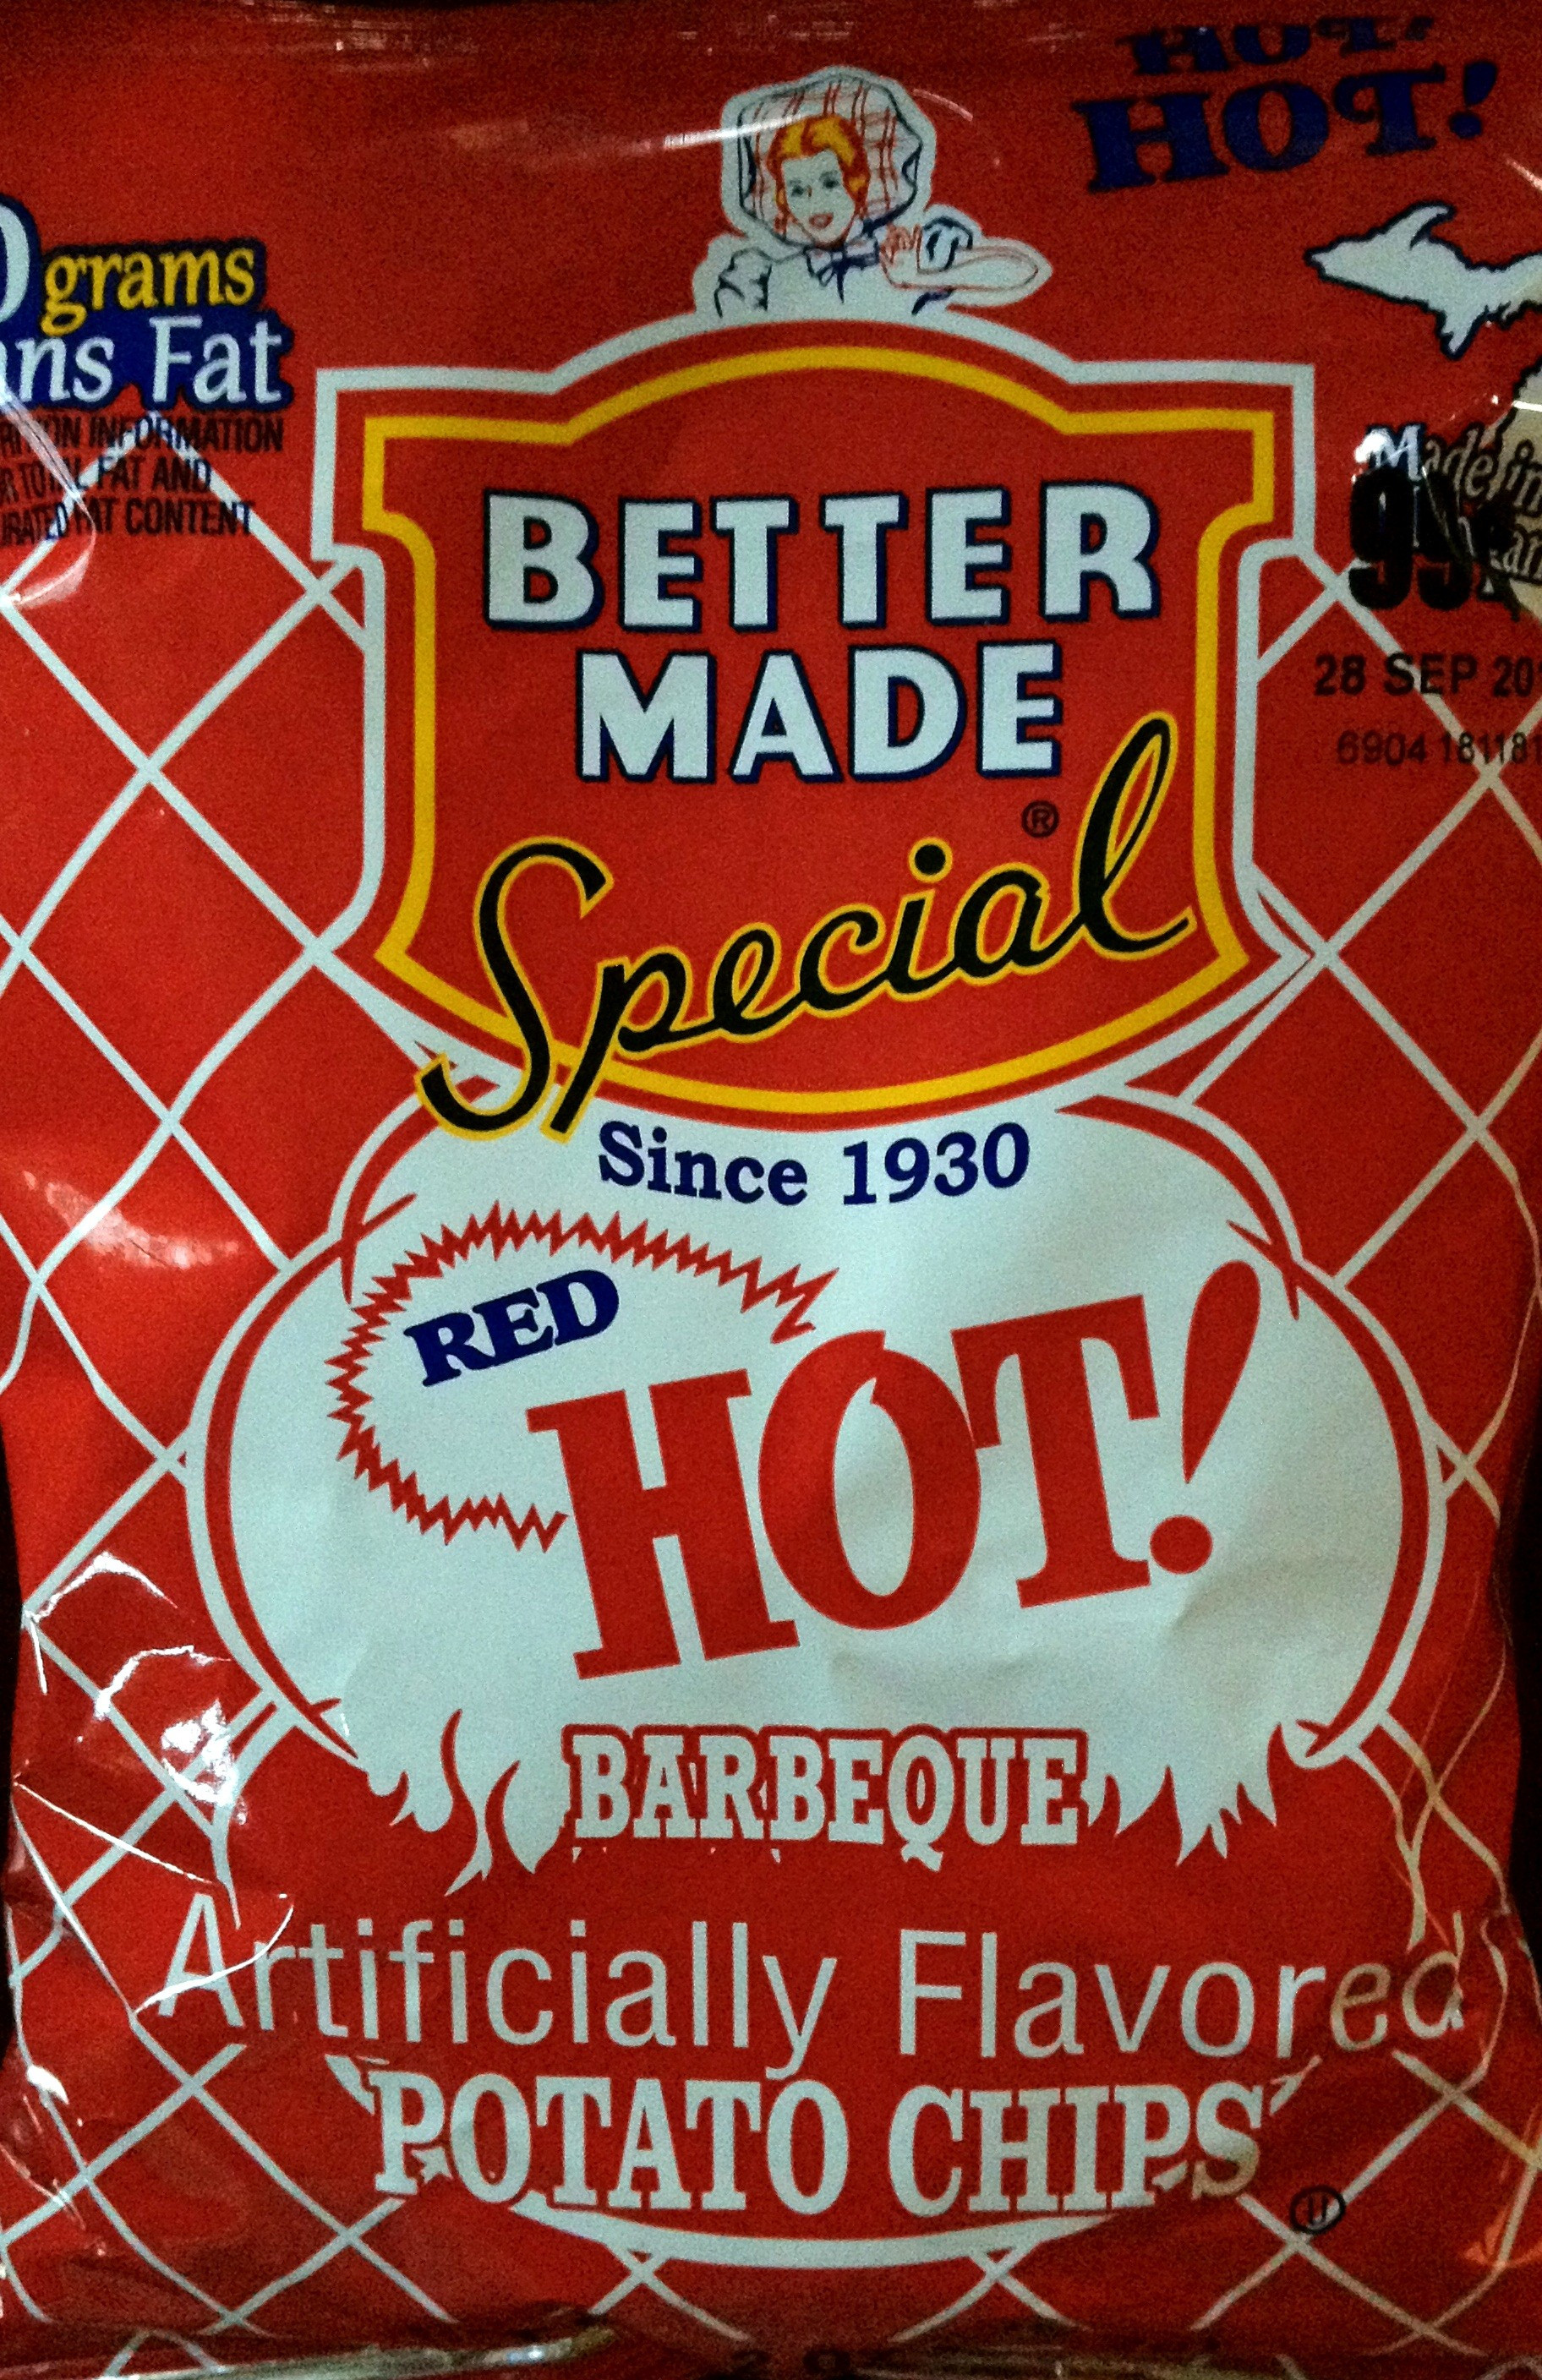 Better Made Potato Chips
 Better Made – Red Hot Barbeque Potato Chips